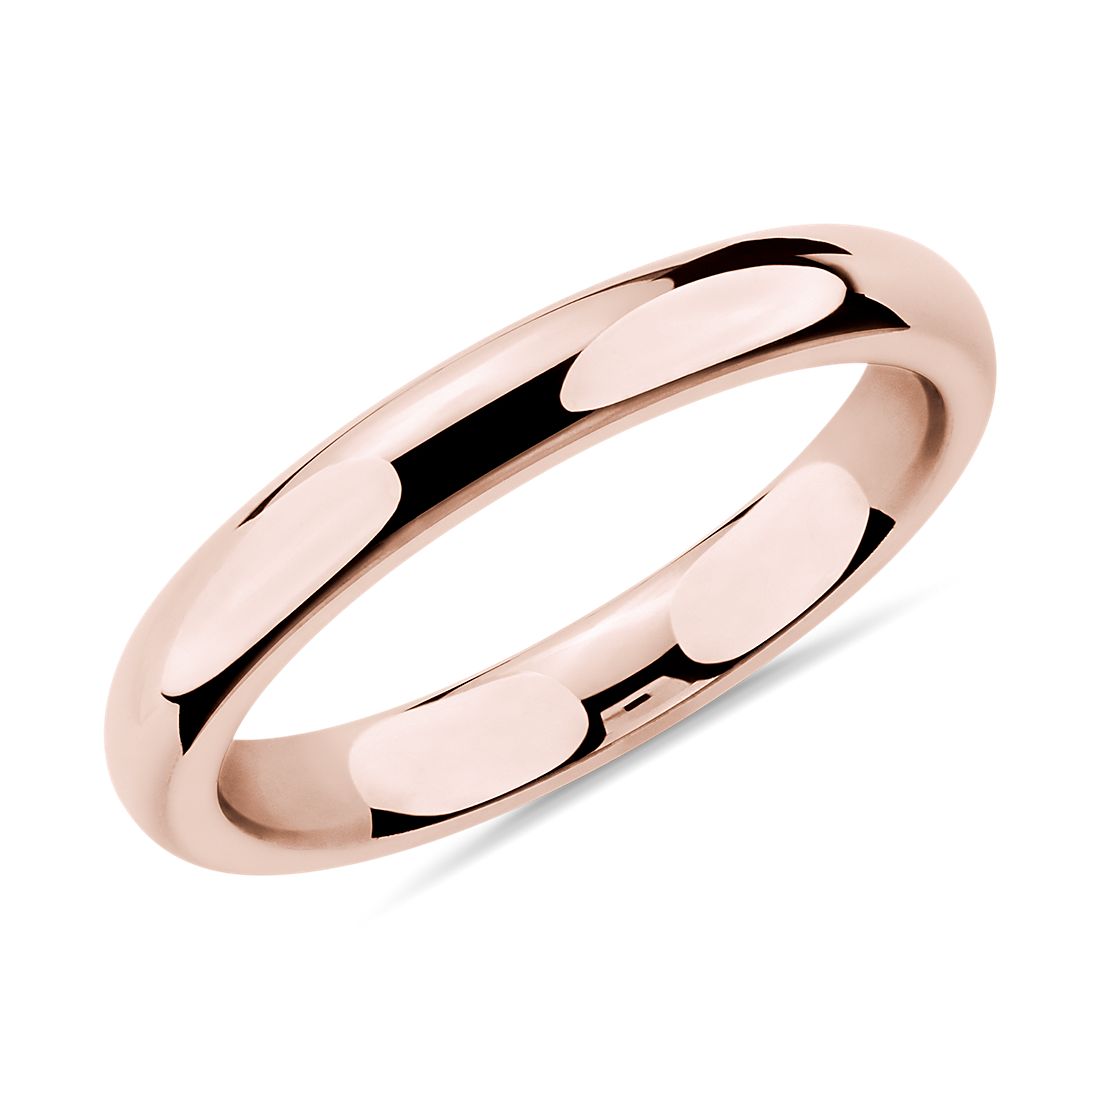 Classic 14k Rose Gold Comfort-Fit Band Dainty 3mm Wedding Ring for Women